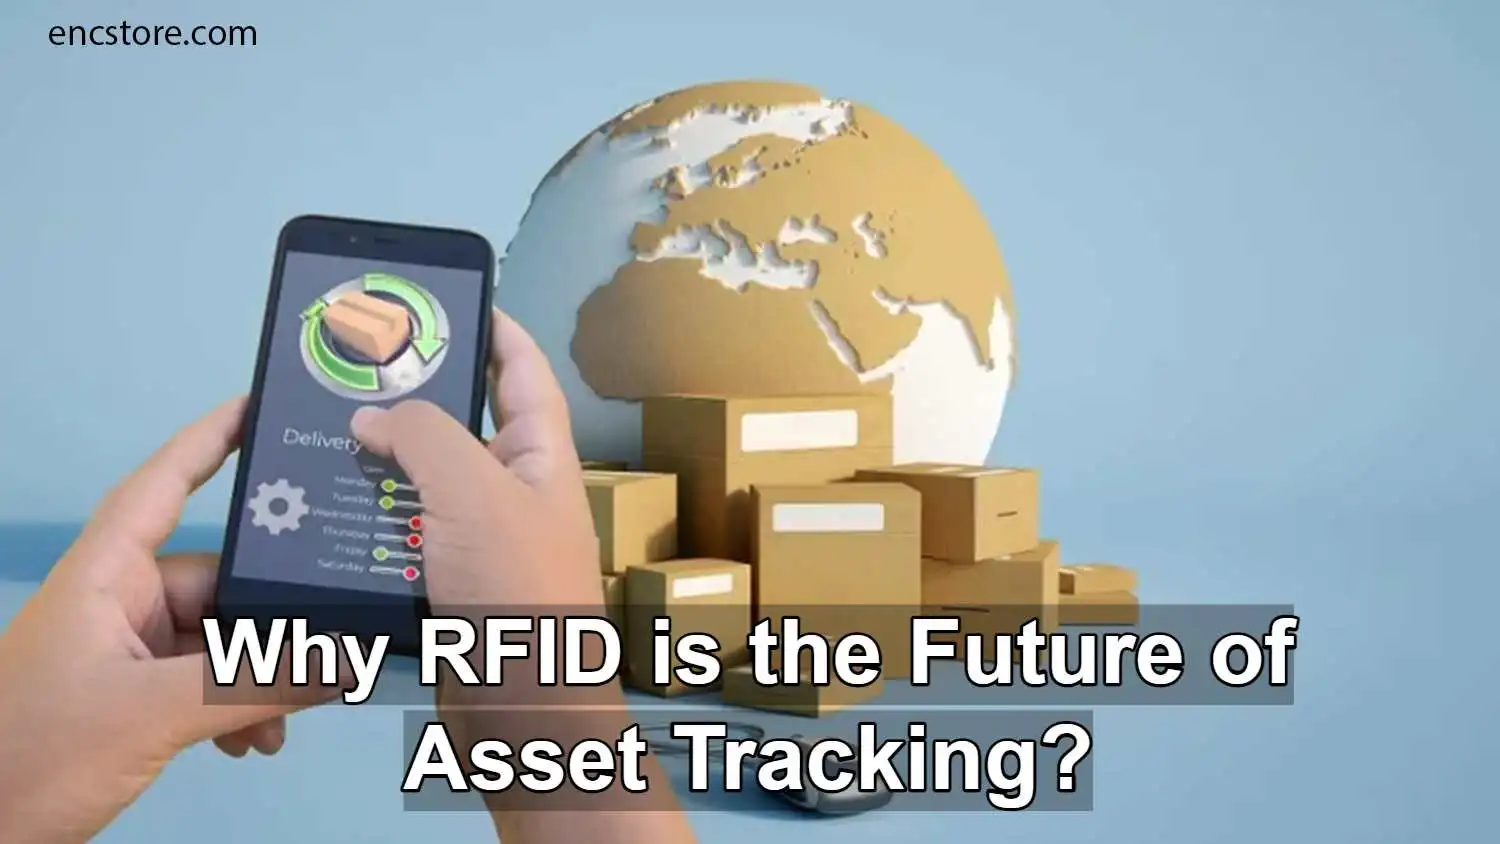 Why RFID is the Future of Asset Tracking